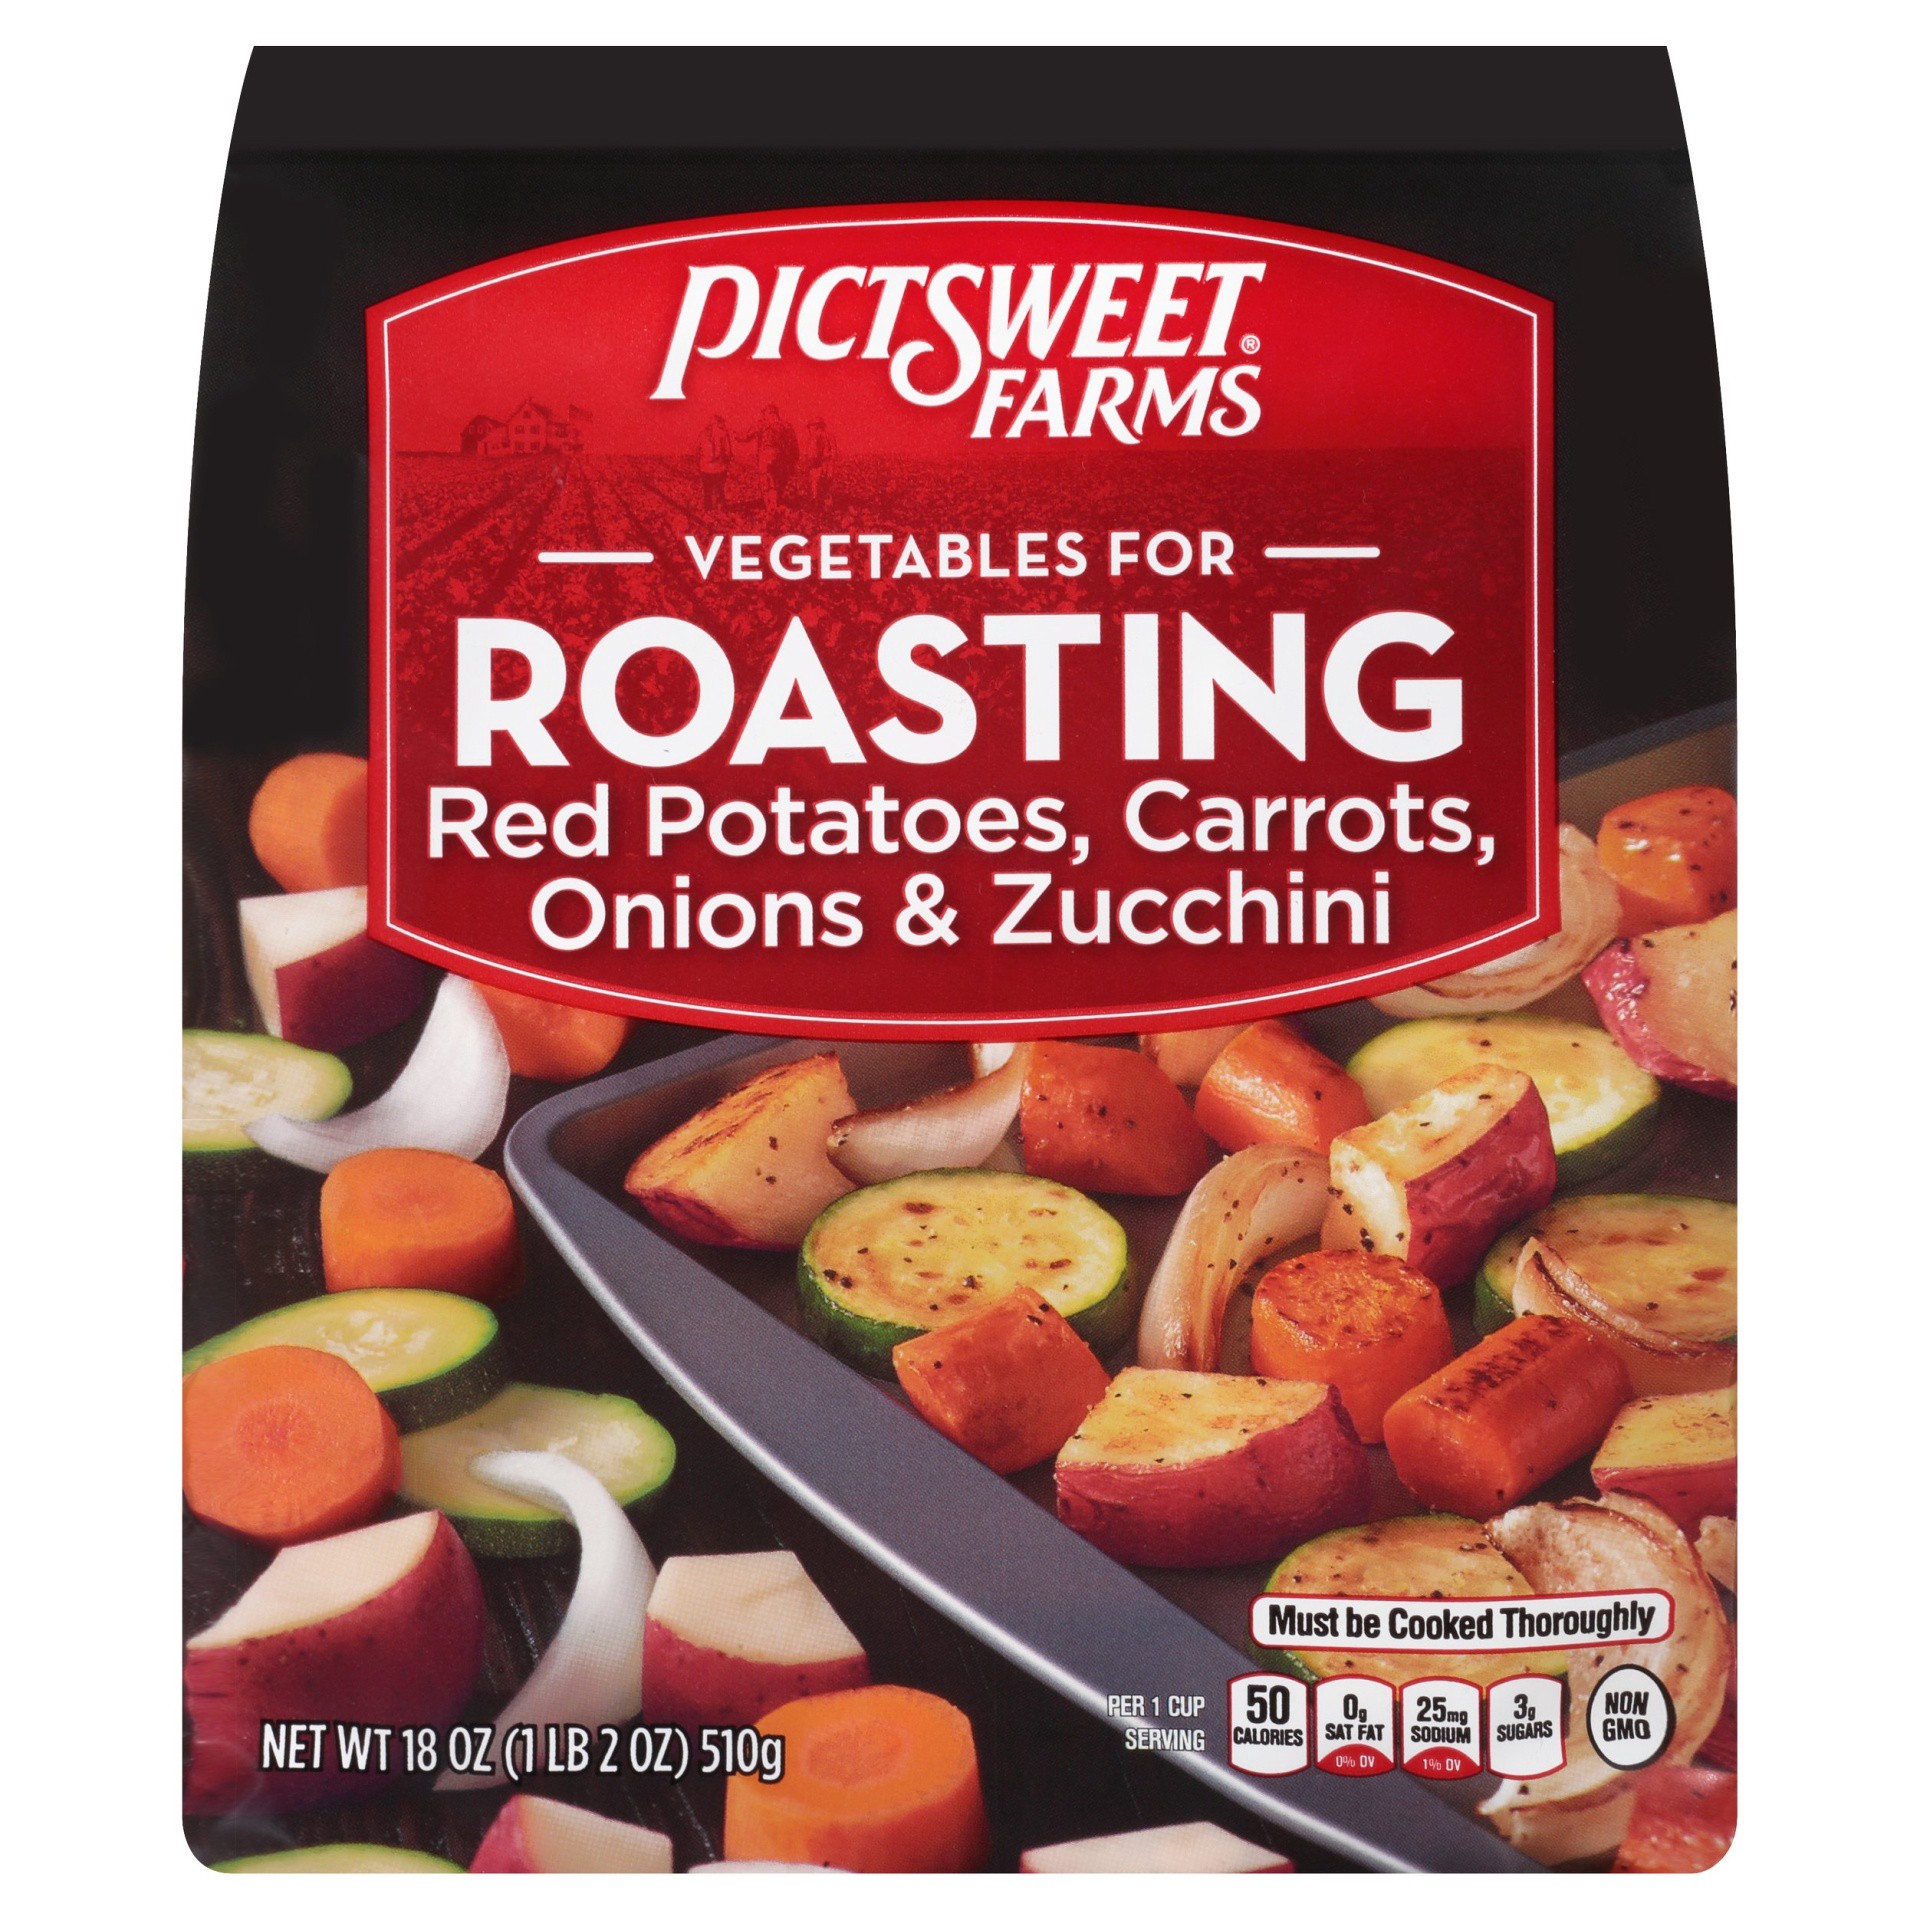 slide 1 of 3, Pictsweet Farms Vegetables for Roasting Red Potatoes, Carrots, Onions & Zucchini - 18 oz, 18 oz